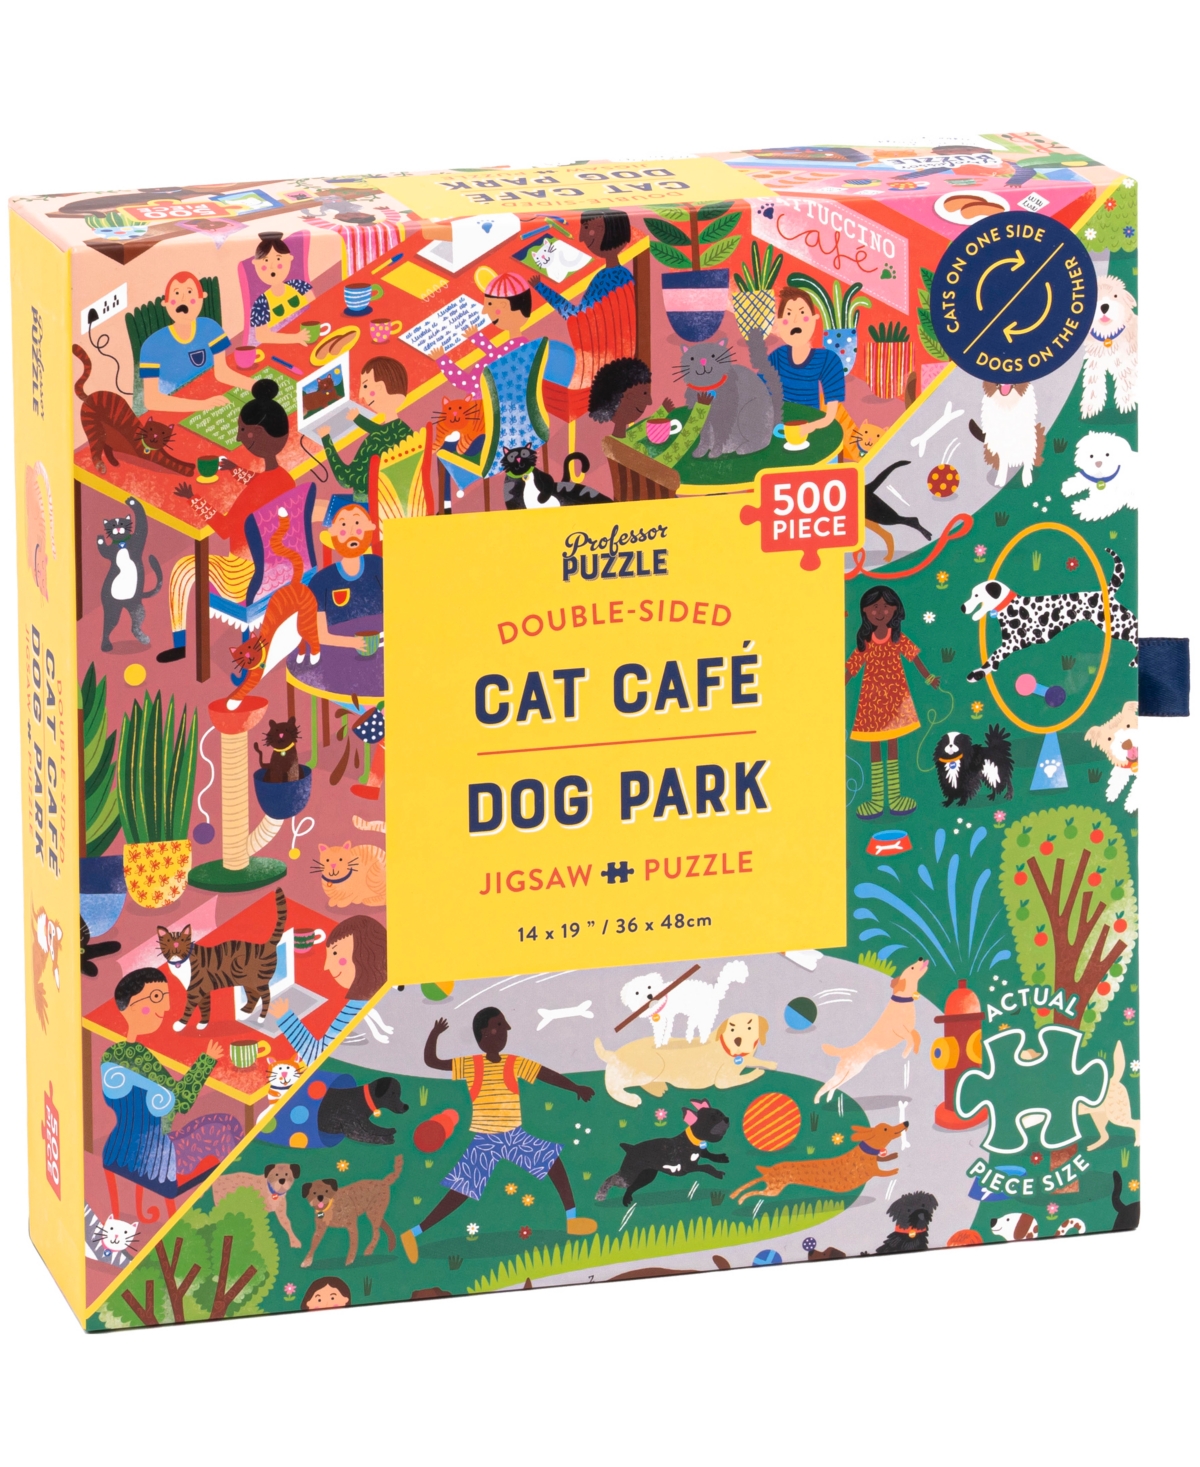 Professor Puzzle Kids' Cat Cafe Dog Park Double-sided Jigsaw Puzzle Set, 502 Pieces In Multi Color